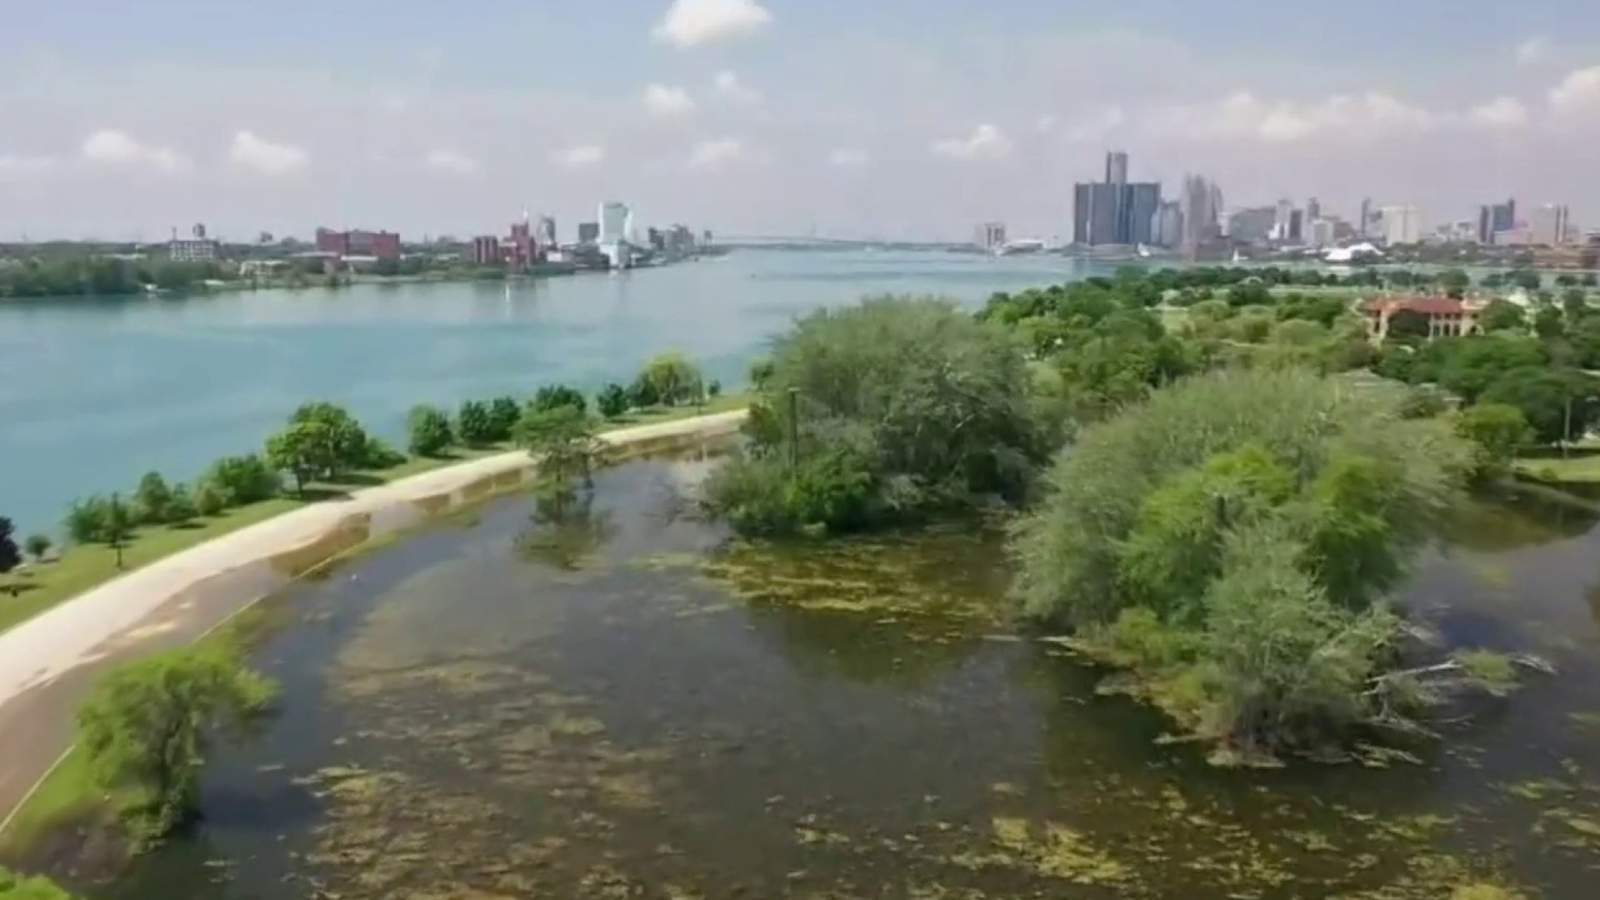 Belle Isle battles to recover from flooding, coronavirus (COVID-19) pandemic